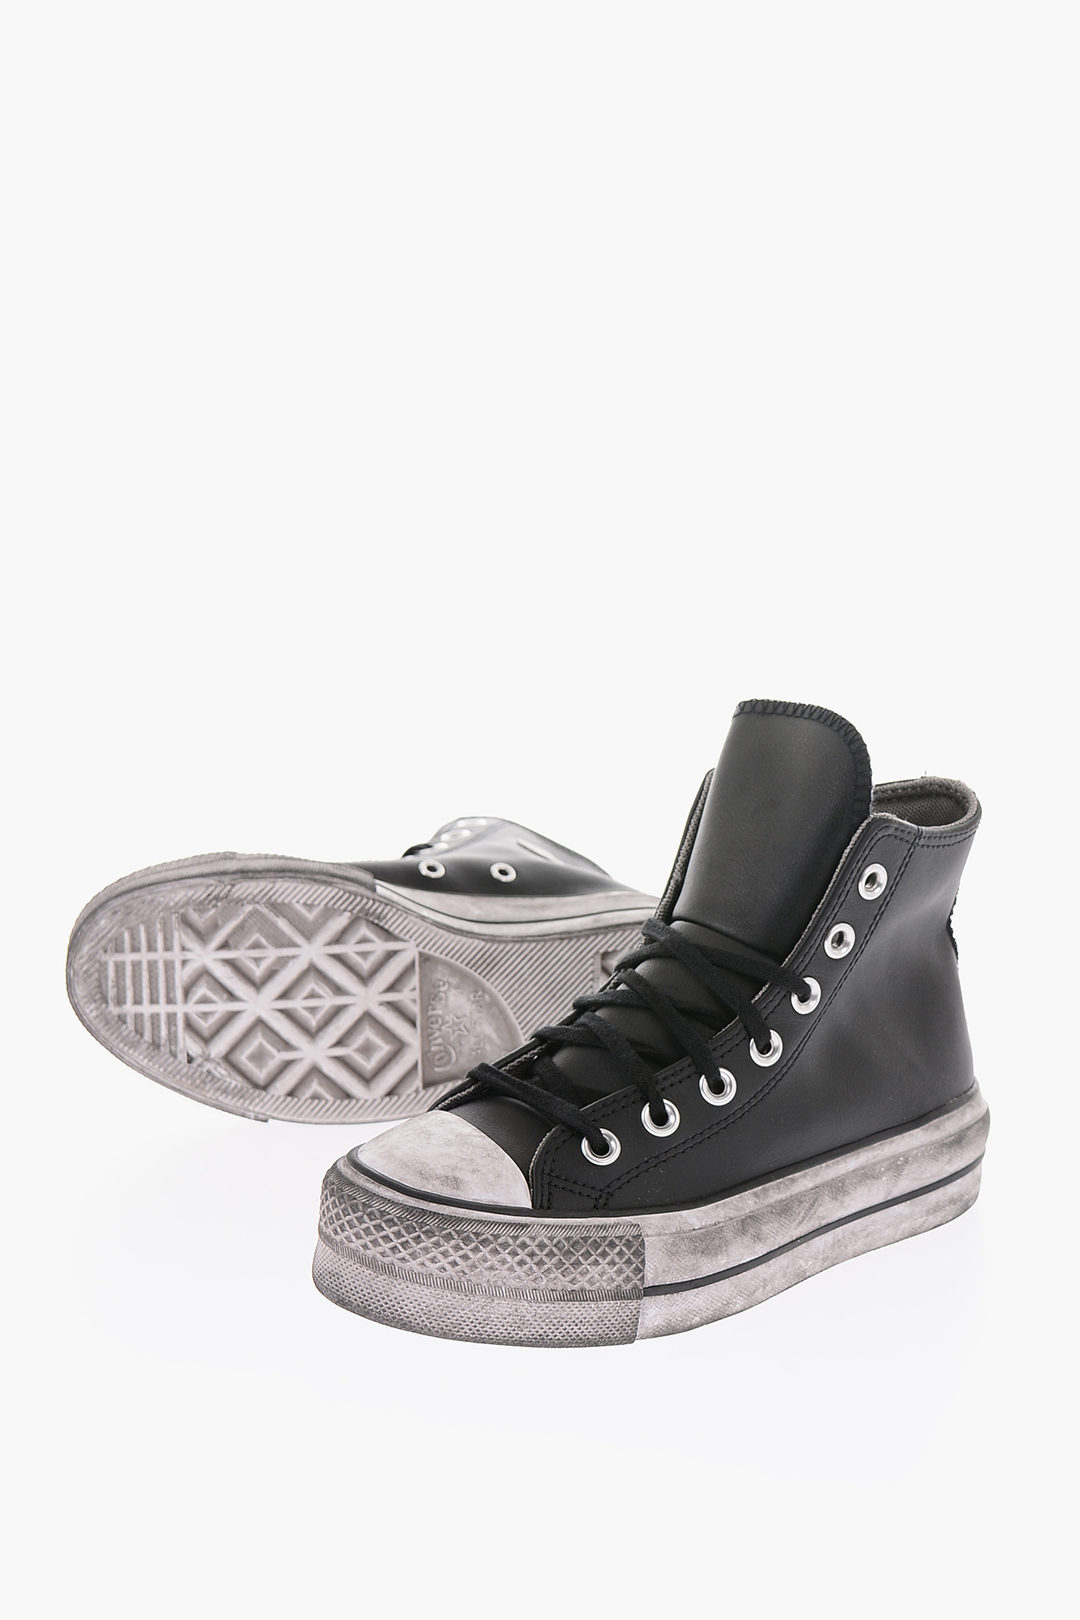 Converse CHUCK TAYLOR ALL STAR 4cm Vintage Effect Leather LIFT High-Top  Sneakers women - Glamood Outlet